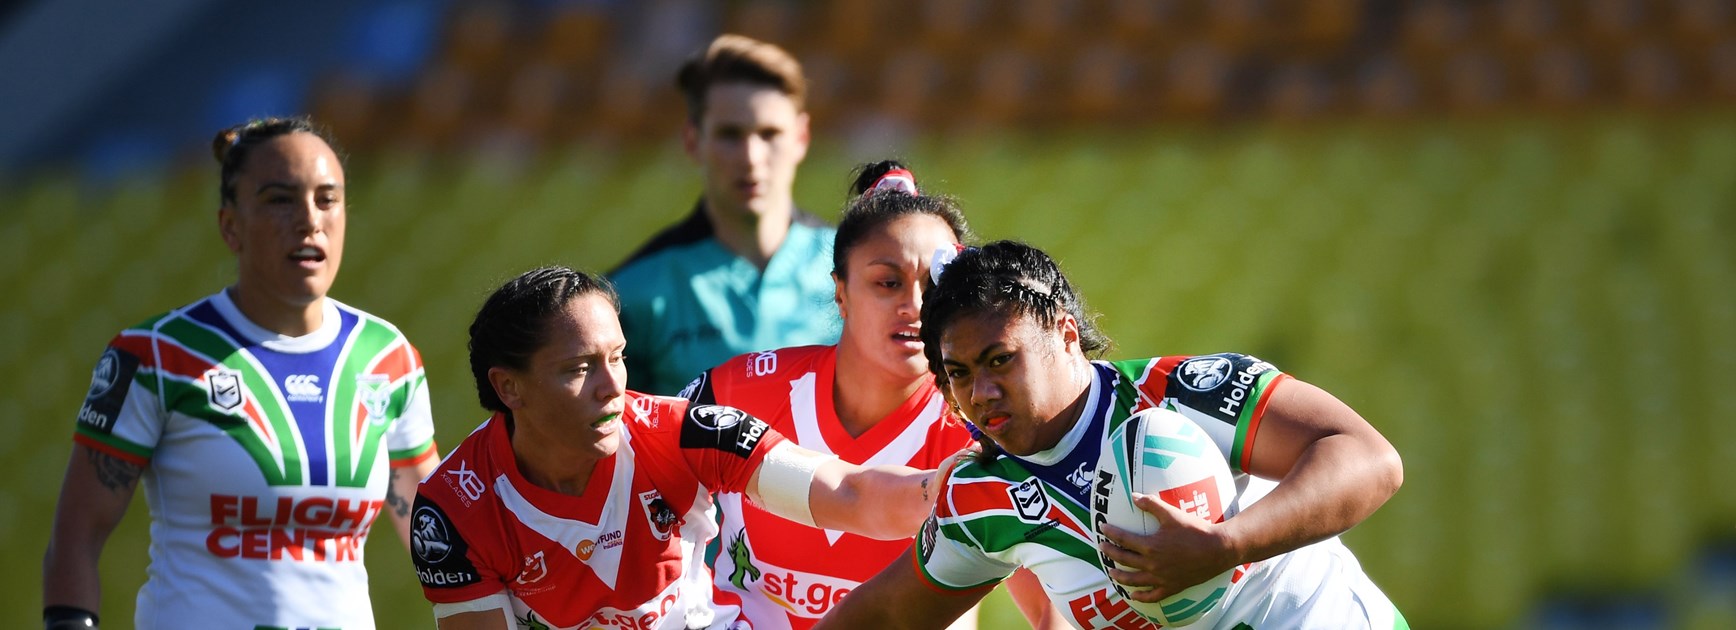 NRLW Team of the Week: Round Two